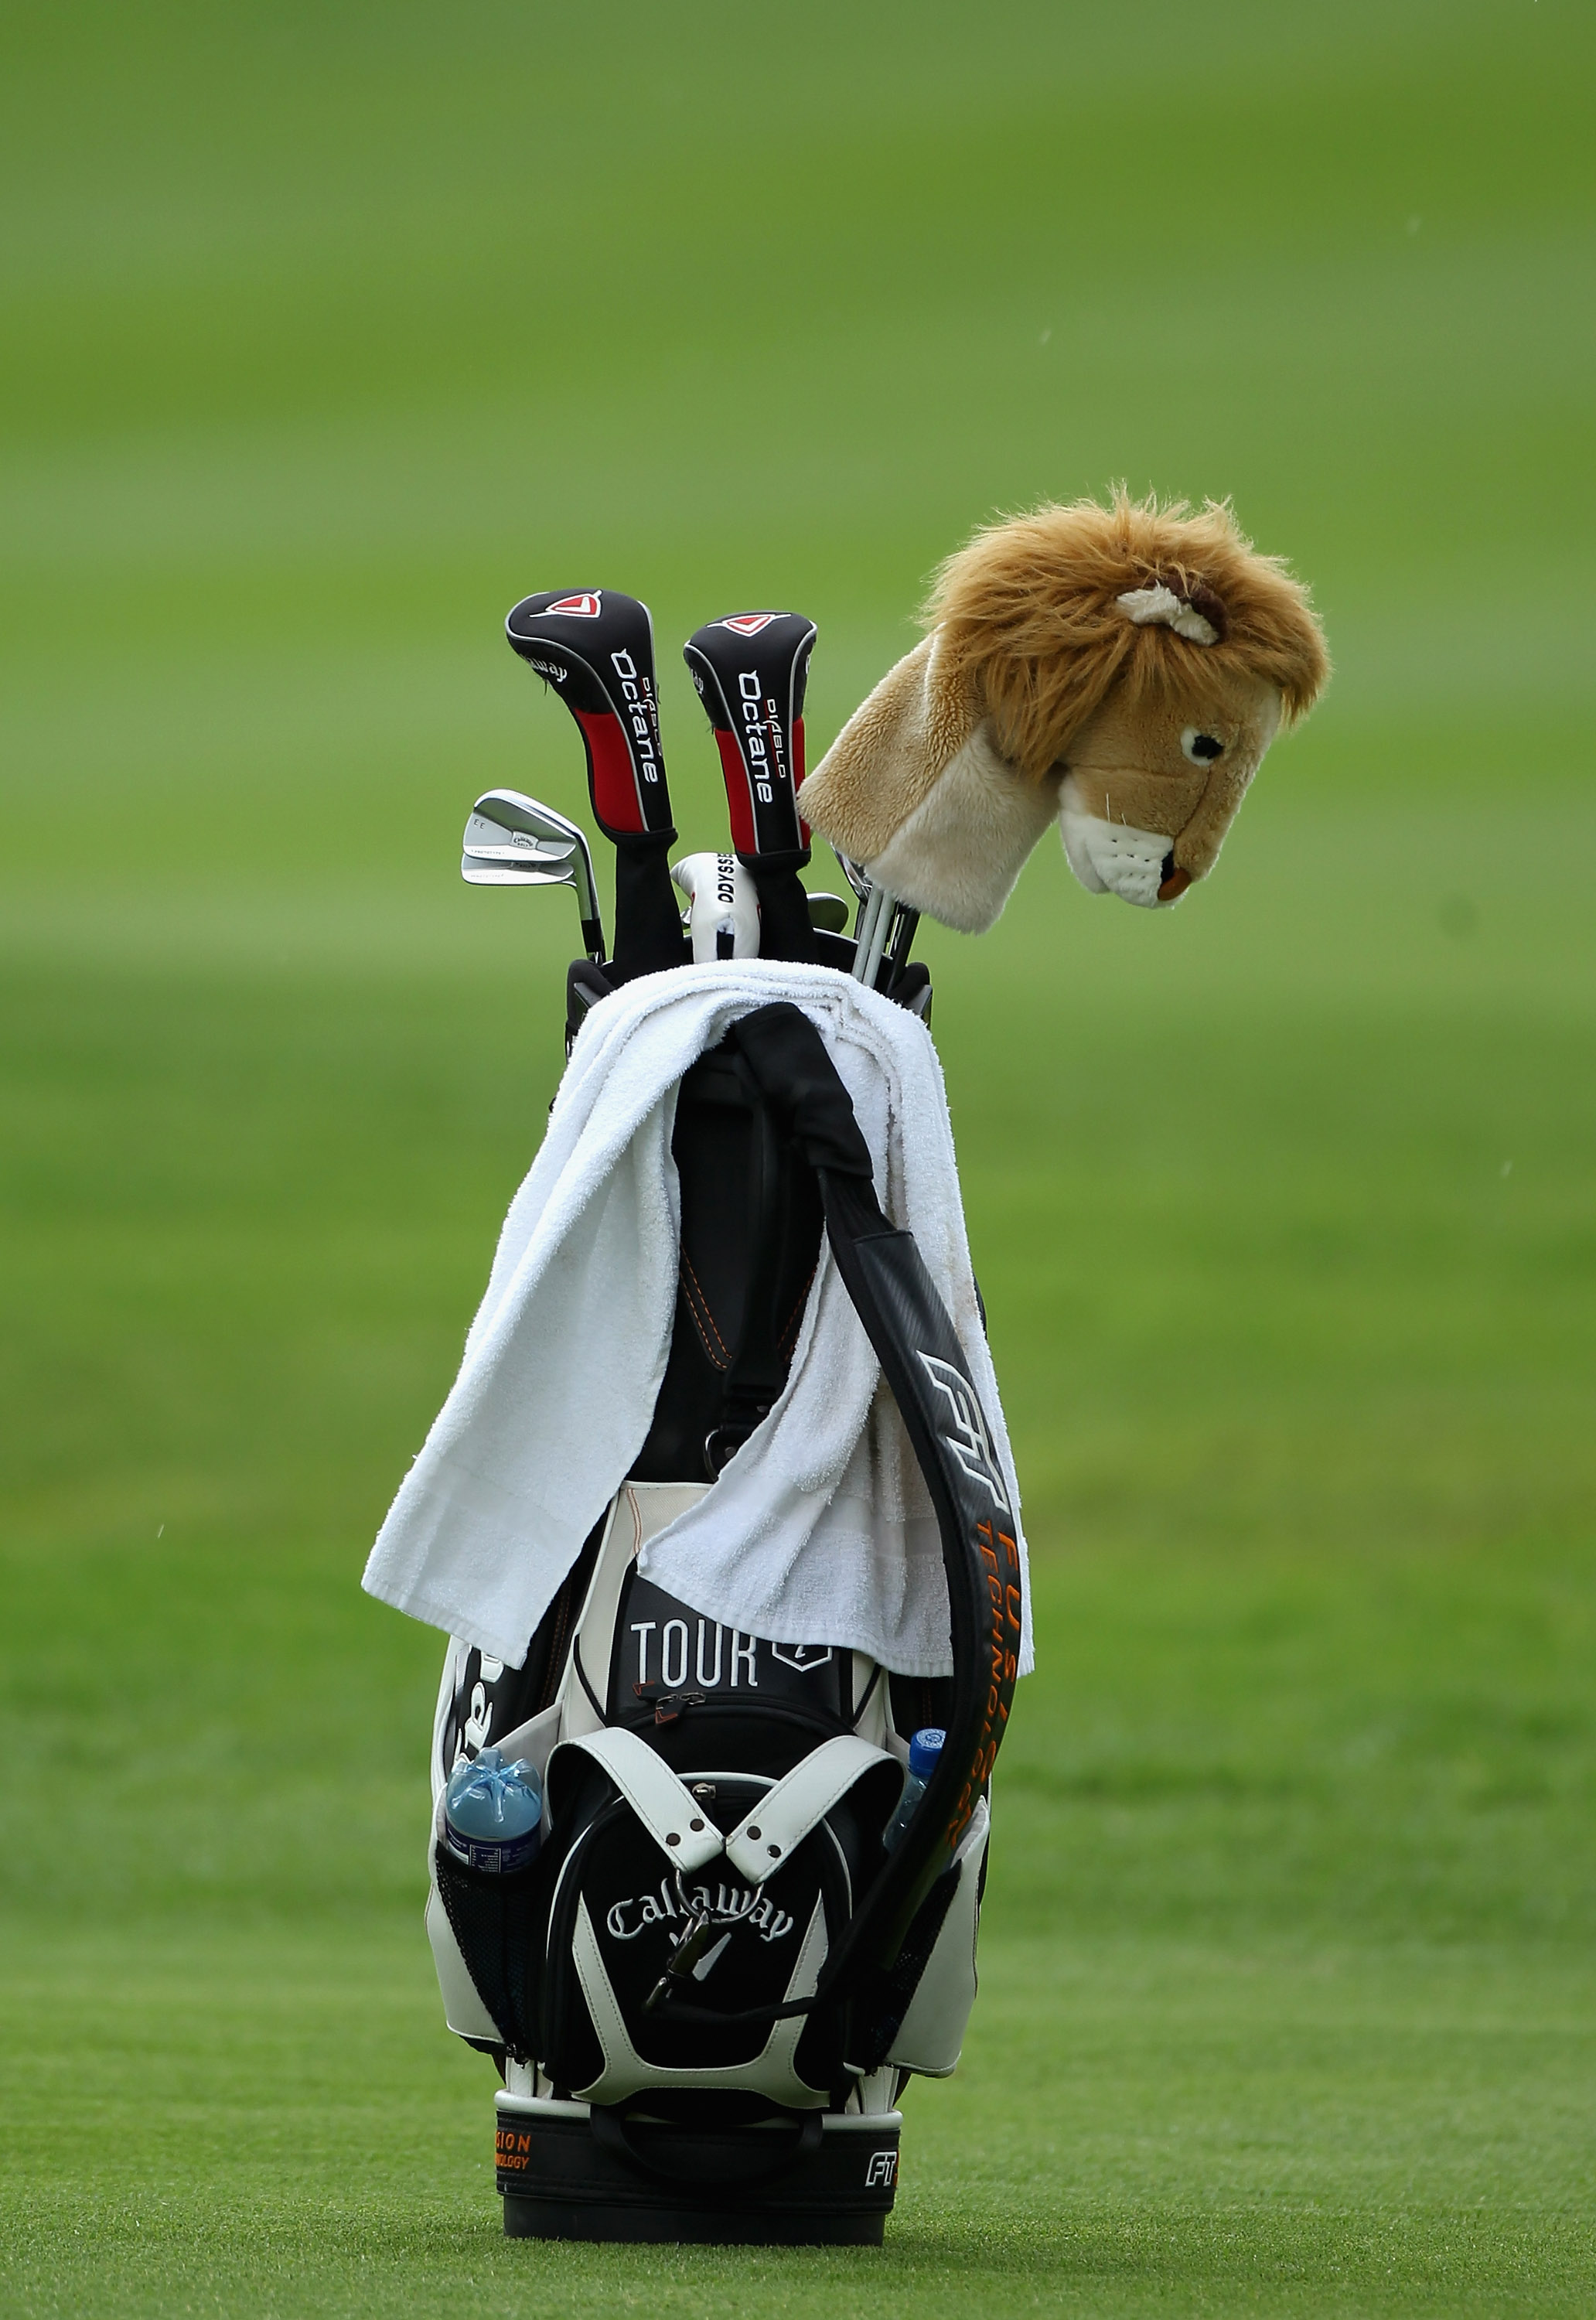 SUN CITY, SOUTH AFRICA - DECEMBER 02:  The bag of Ernie Els of South Africa during the first round of the 2010 Nedbank Golf Challenge at the Gary Player Country Club Course  on December 2, 2010 in Sun City, South Africa.  (Photo by Warren Little/Getty Ima